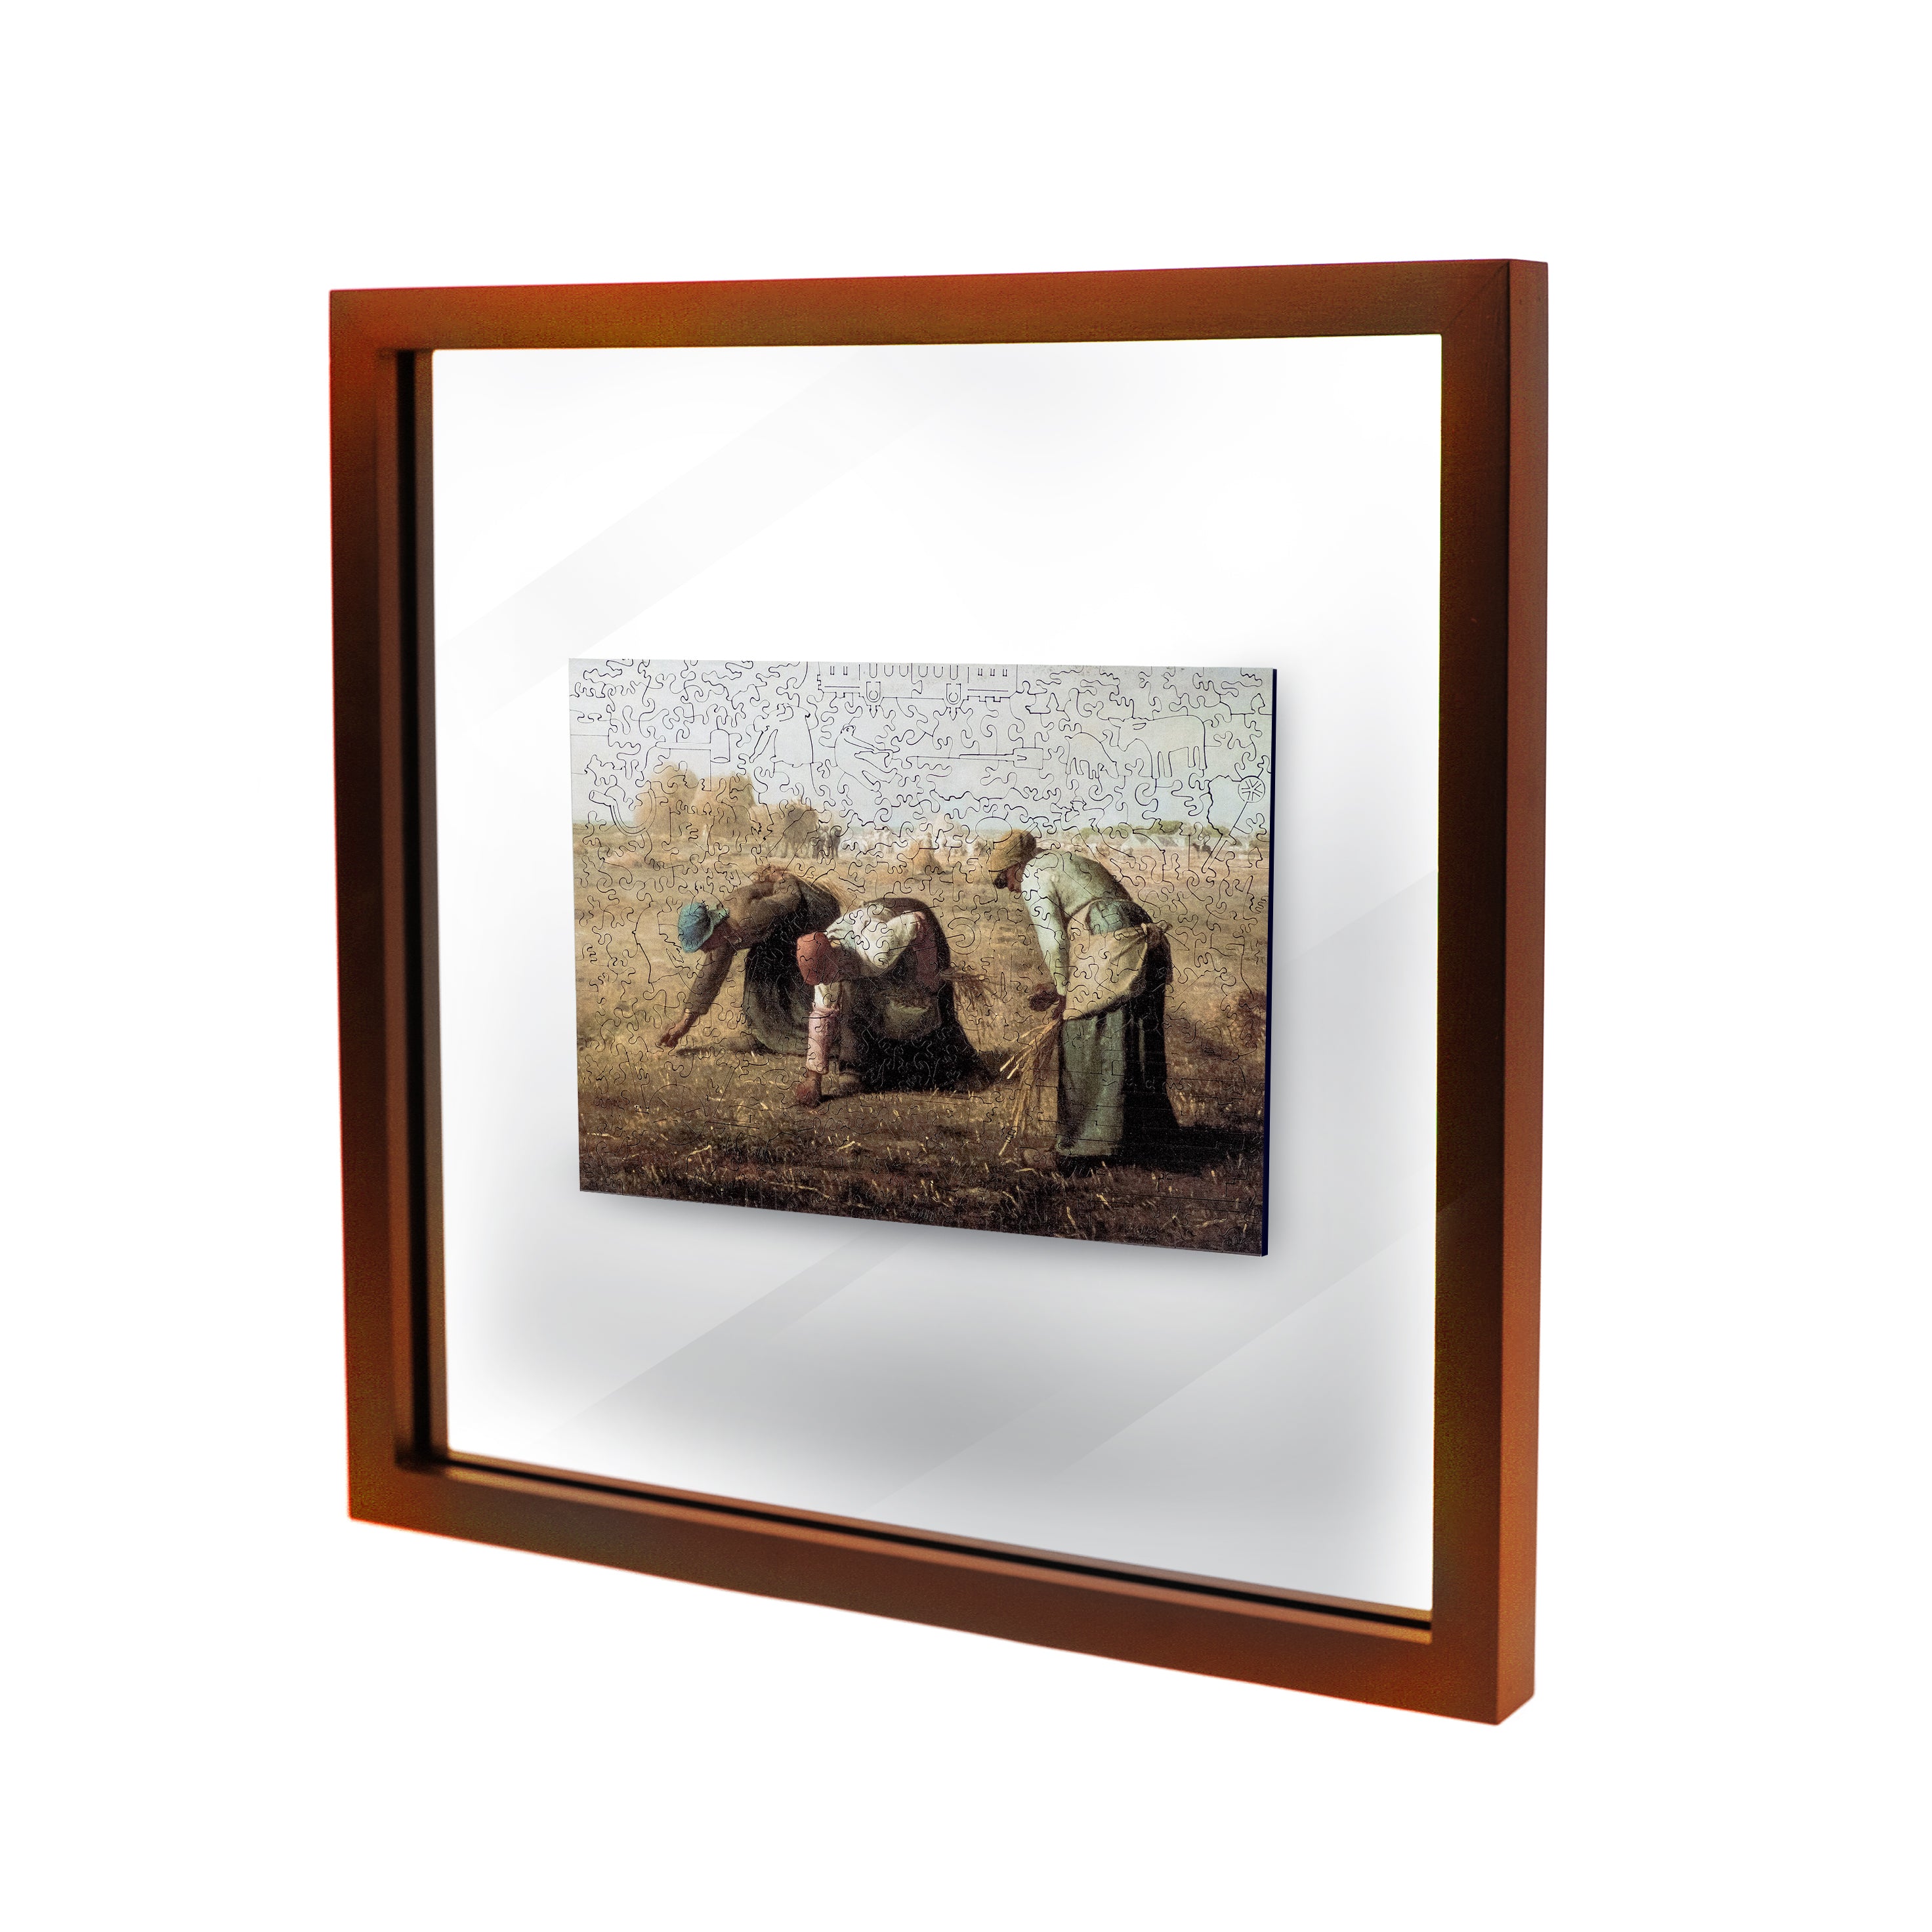 Double-Sided Wooden Display Frame